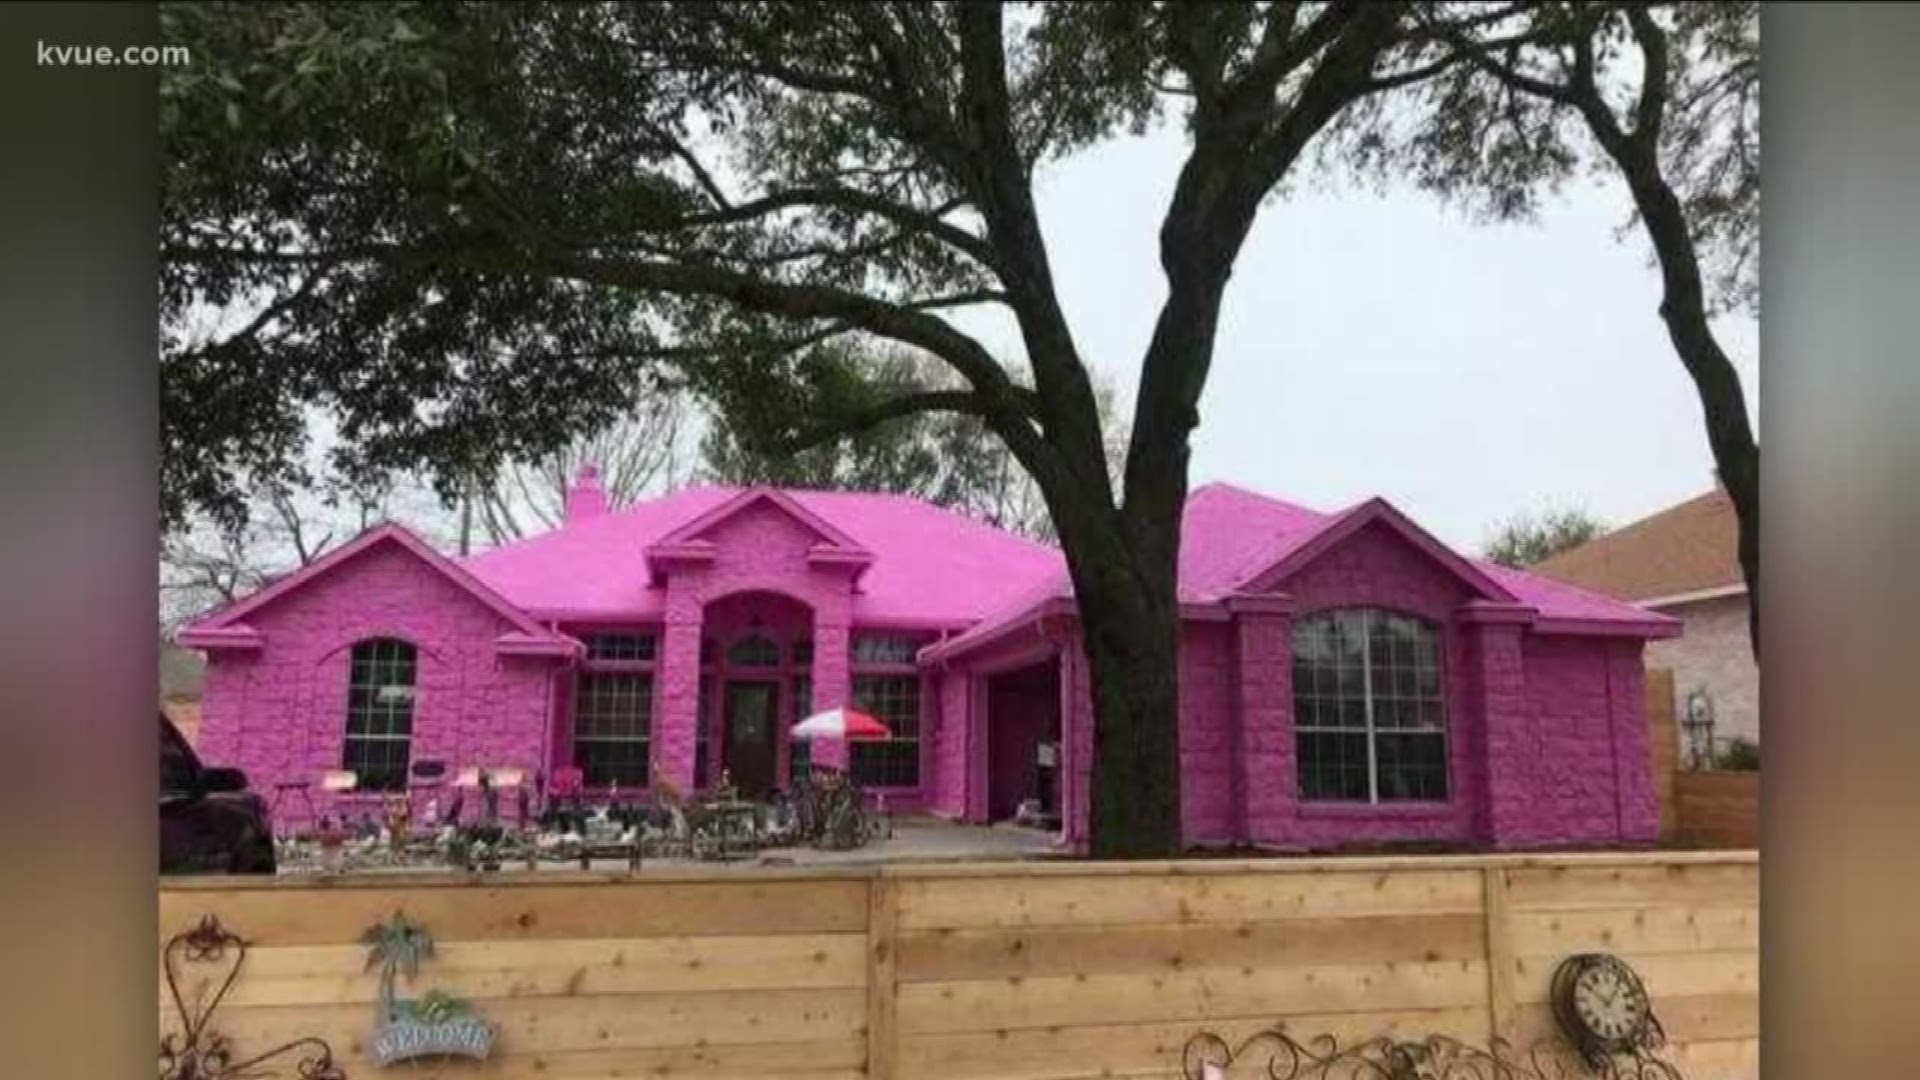 Pink house turning heads in Pflugerville